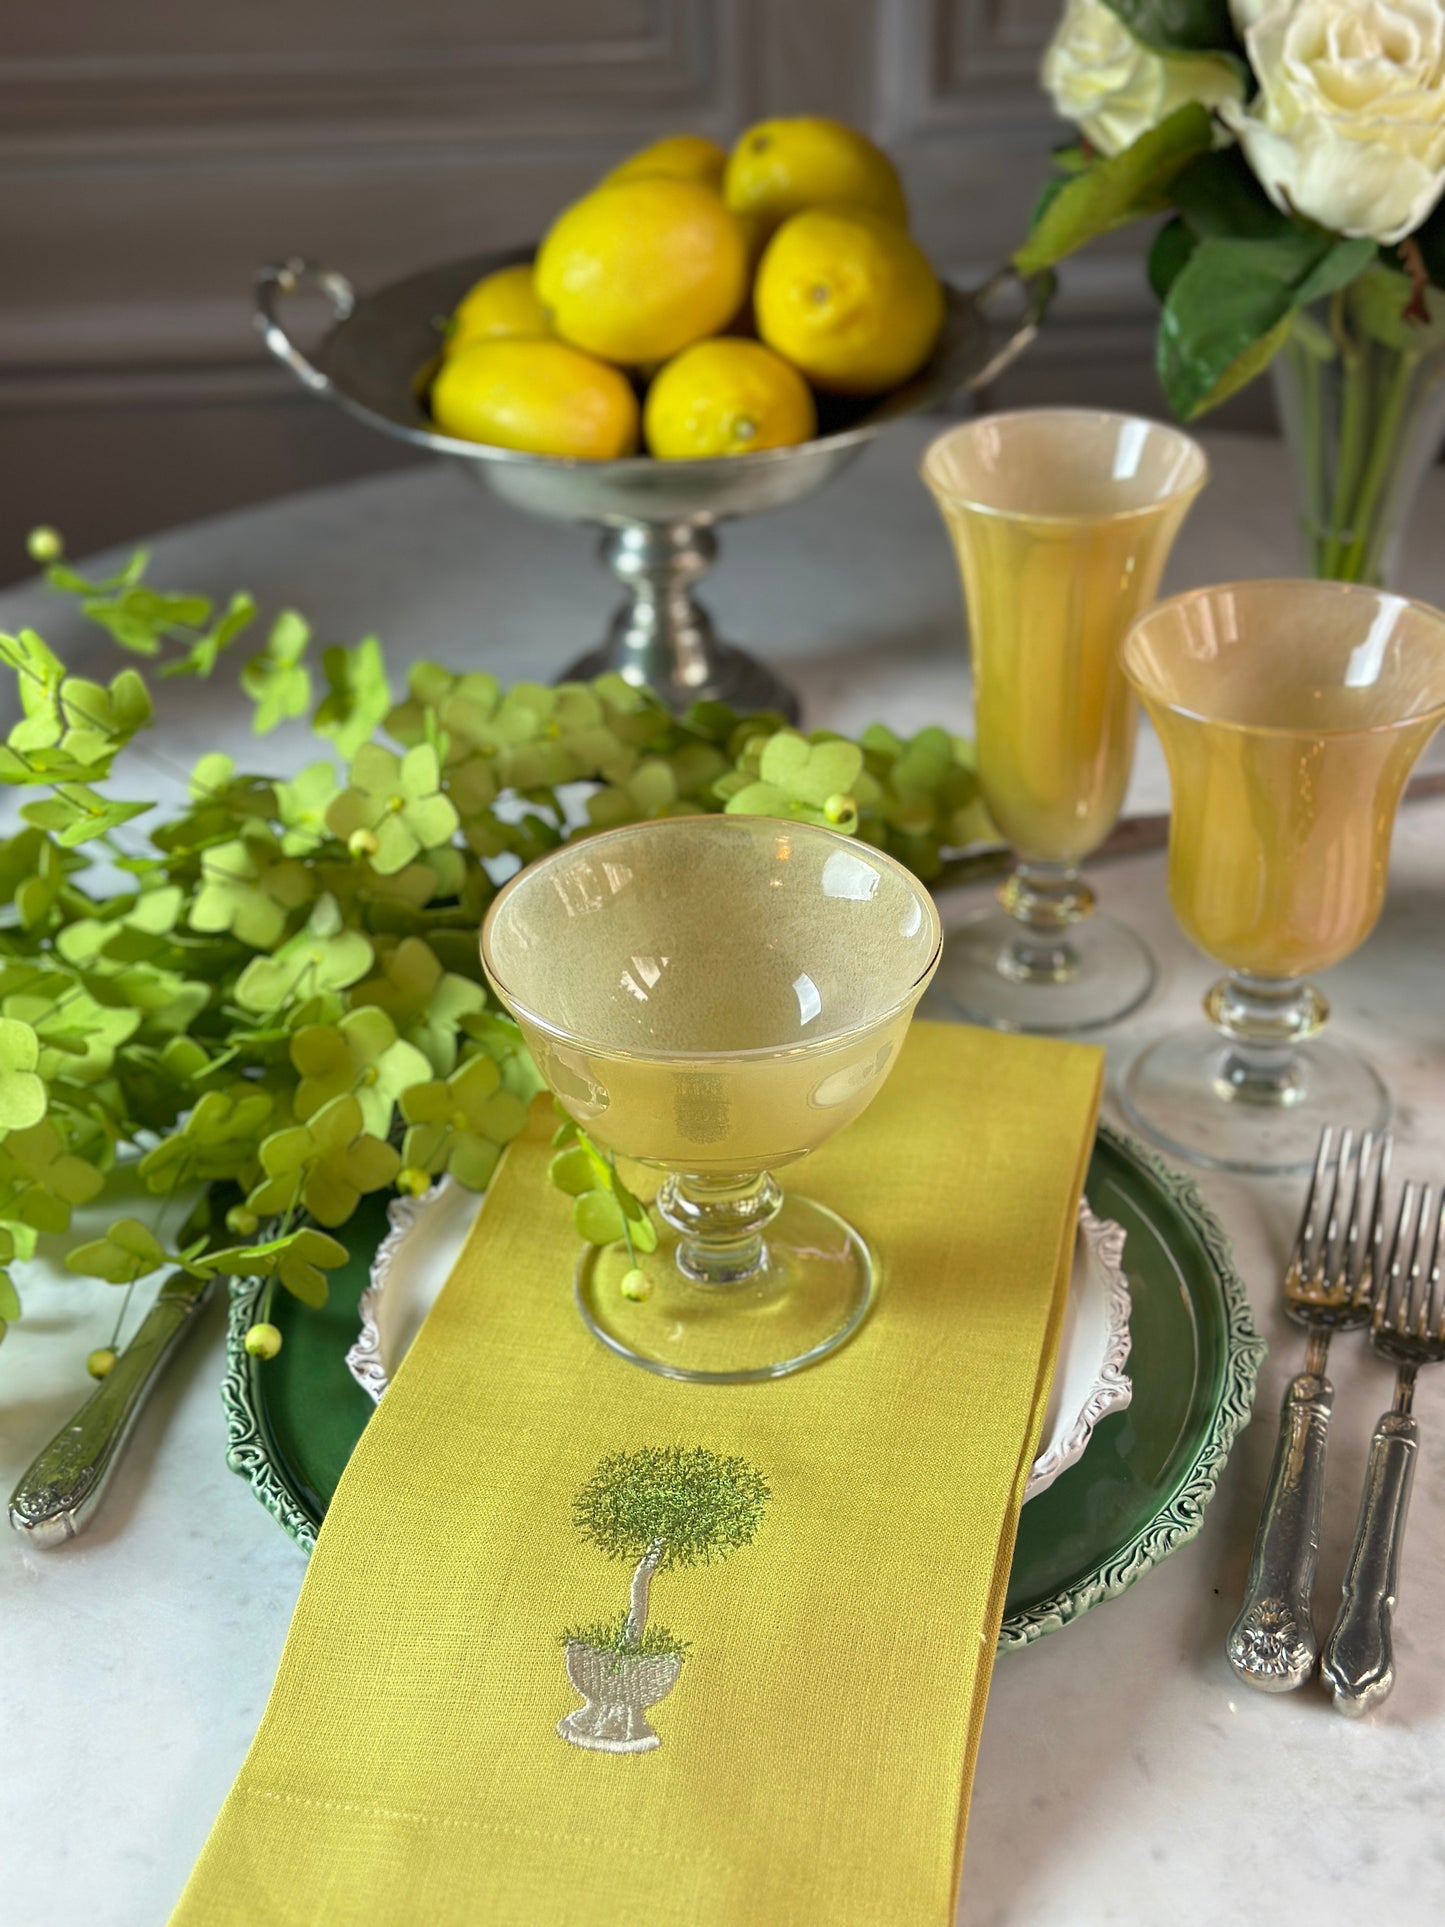 Herb Topiary Linen Towel - New Color